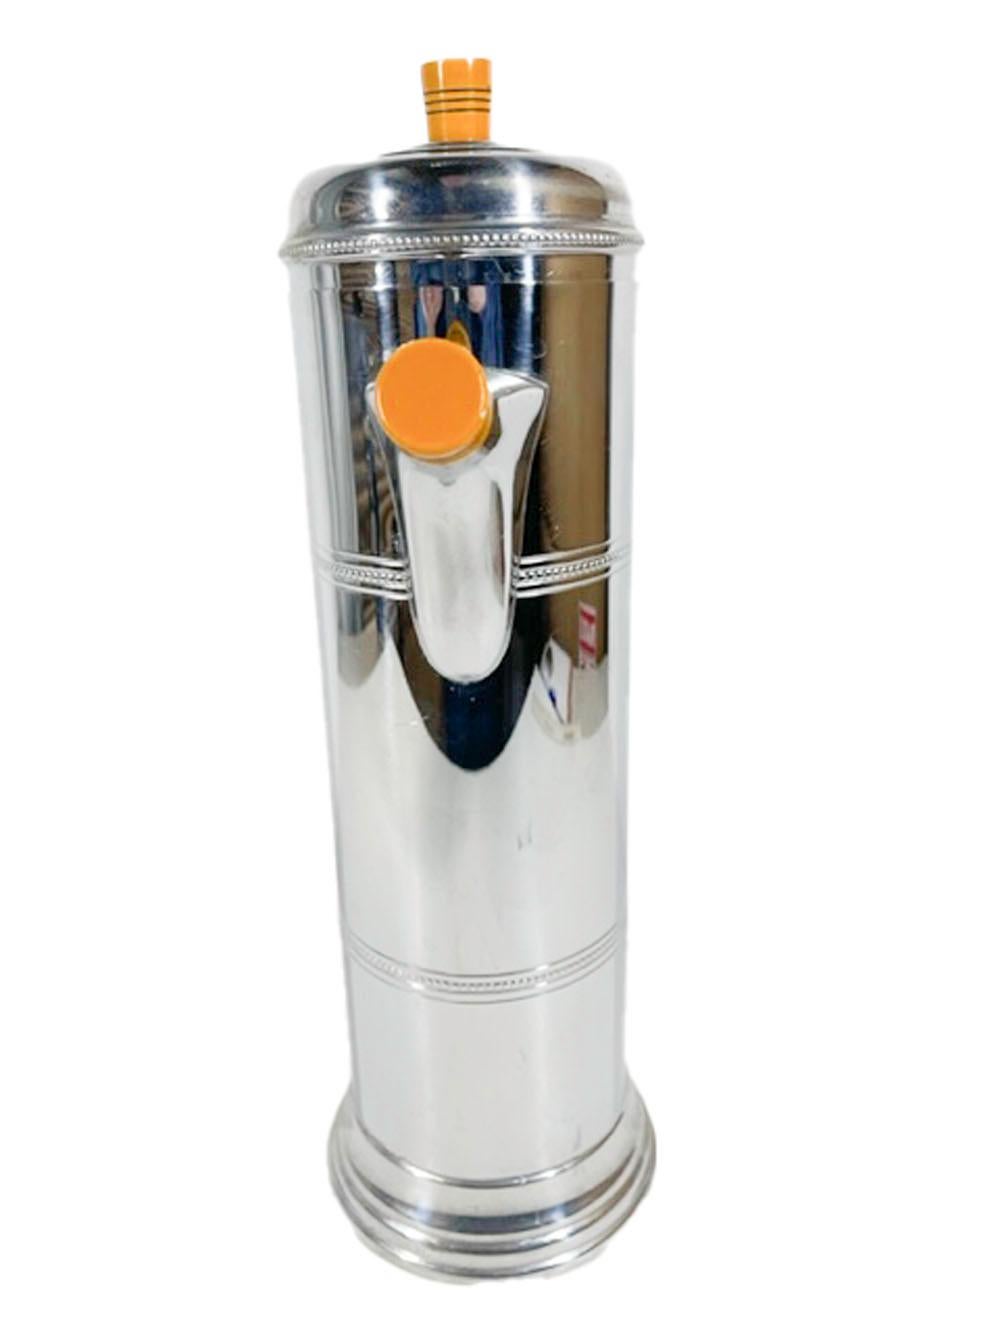 Art Deco chrome cocktail shaker of cylindrical form with beaded bands made by the Krome-Kraft division of Farber Brothers. Having a butterscotch handle as well as lid and spout knobs each embellished with blackened incised lines. Marked on the